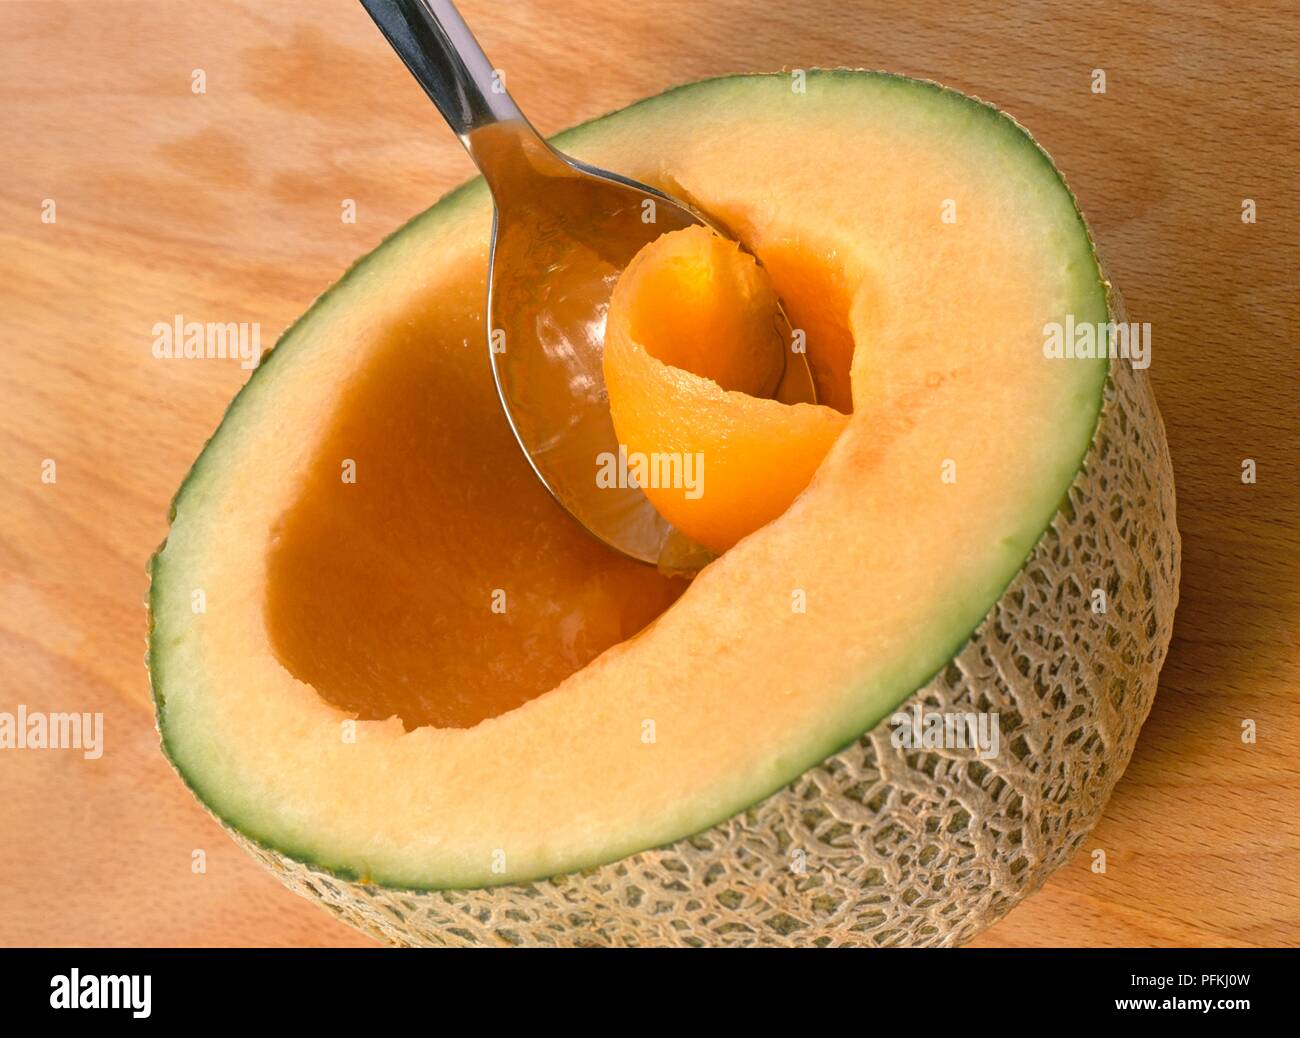 Using spoon to scoop out flesh from cantaloupe melon, close-up Stock Photo